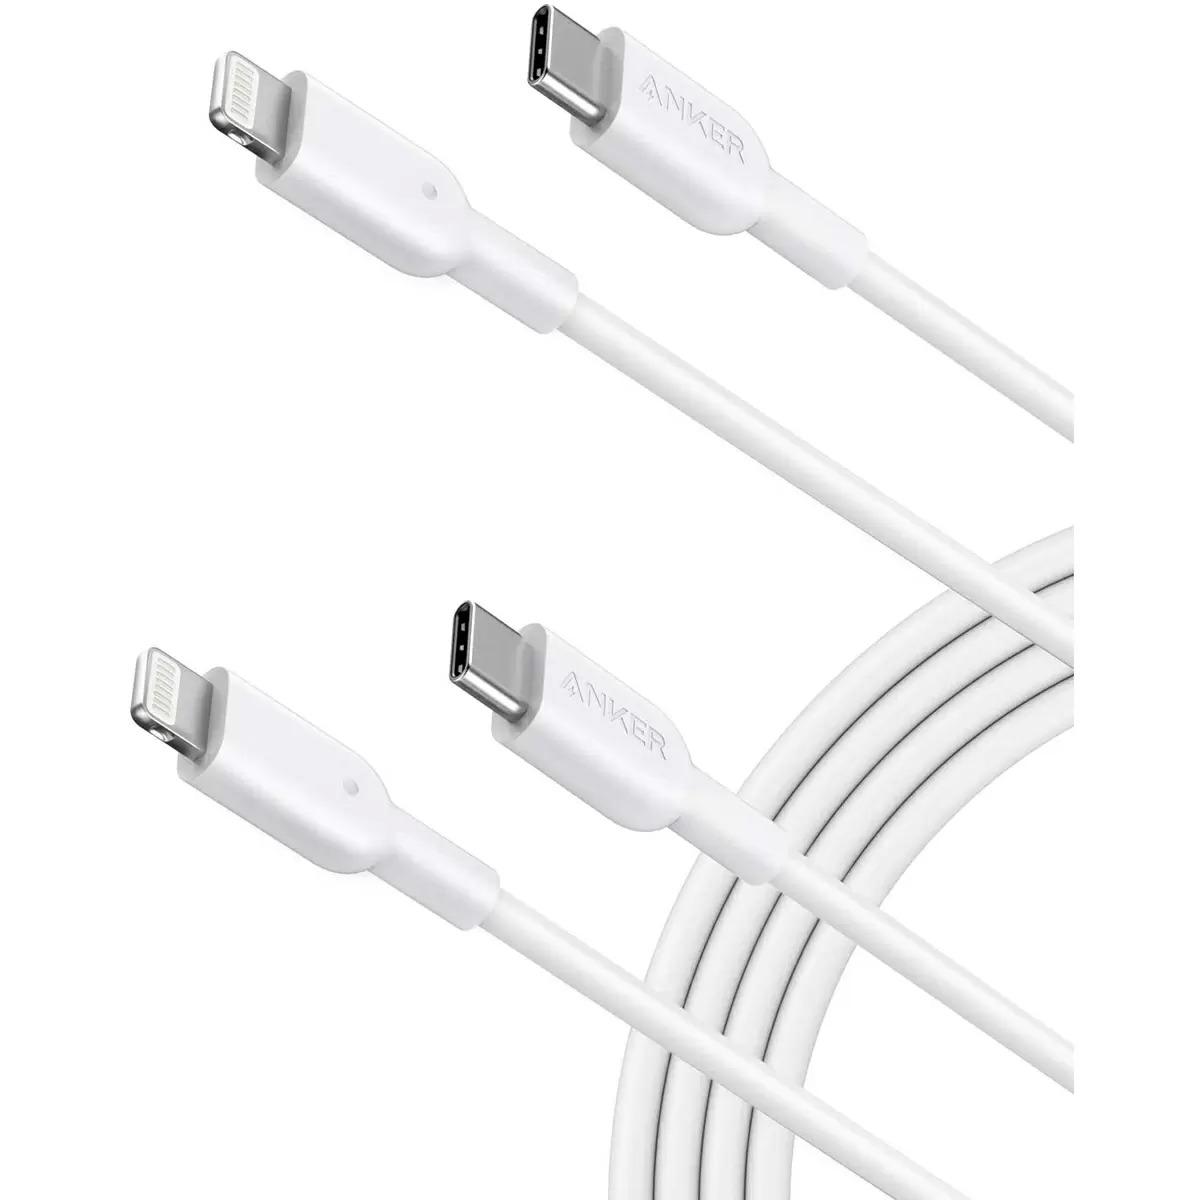 2 Anker Powerline III USB C to USB C Cables for $16.99